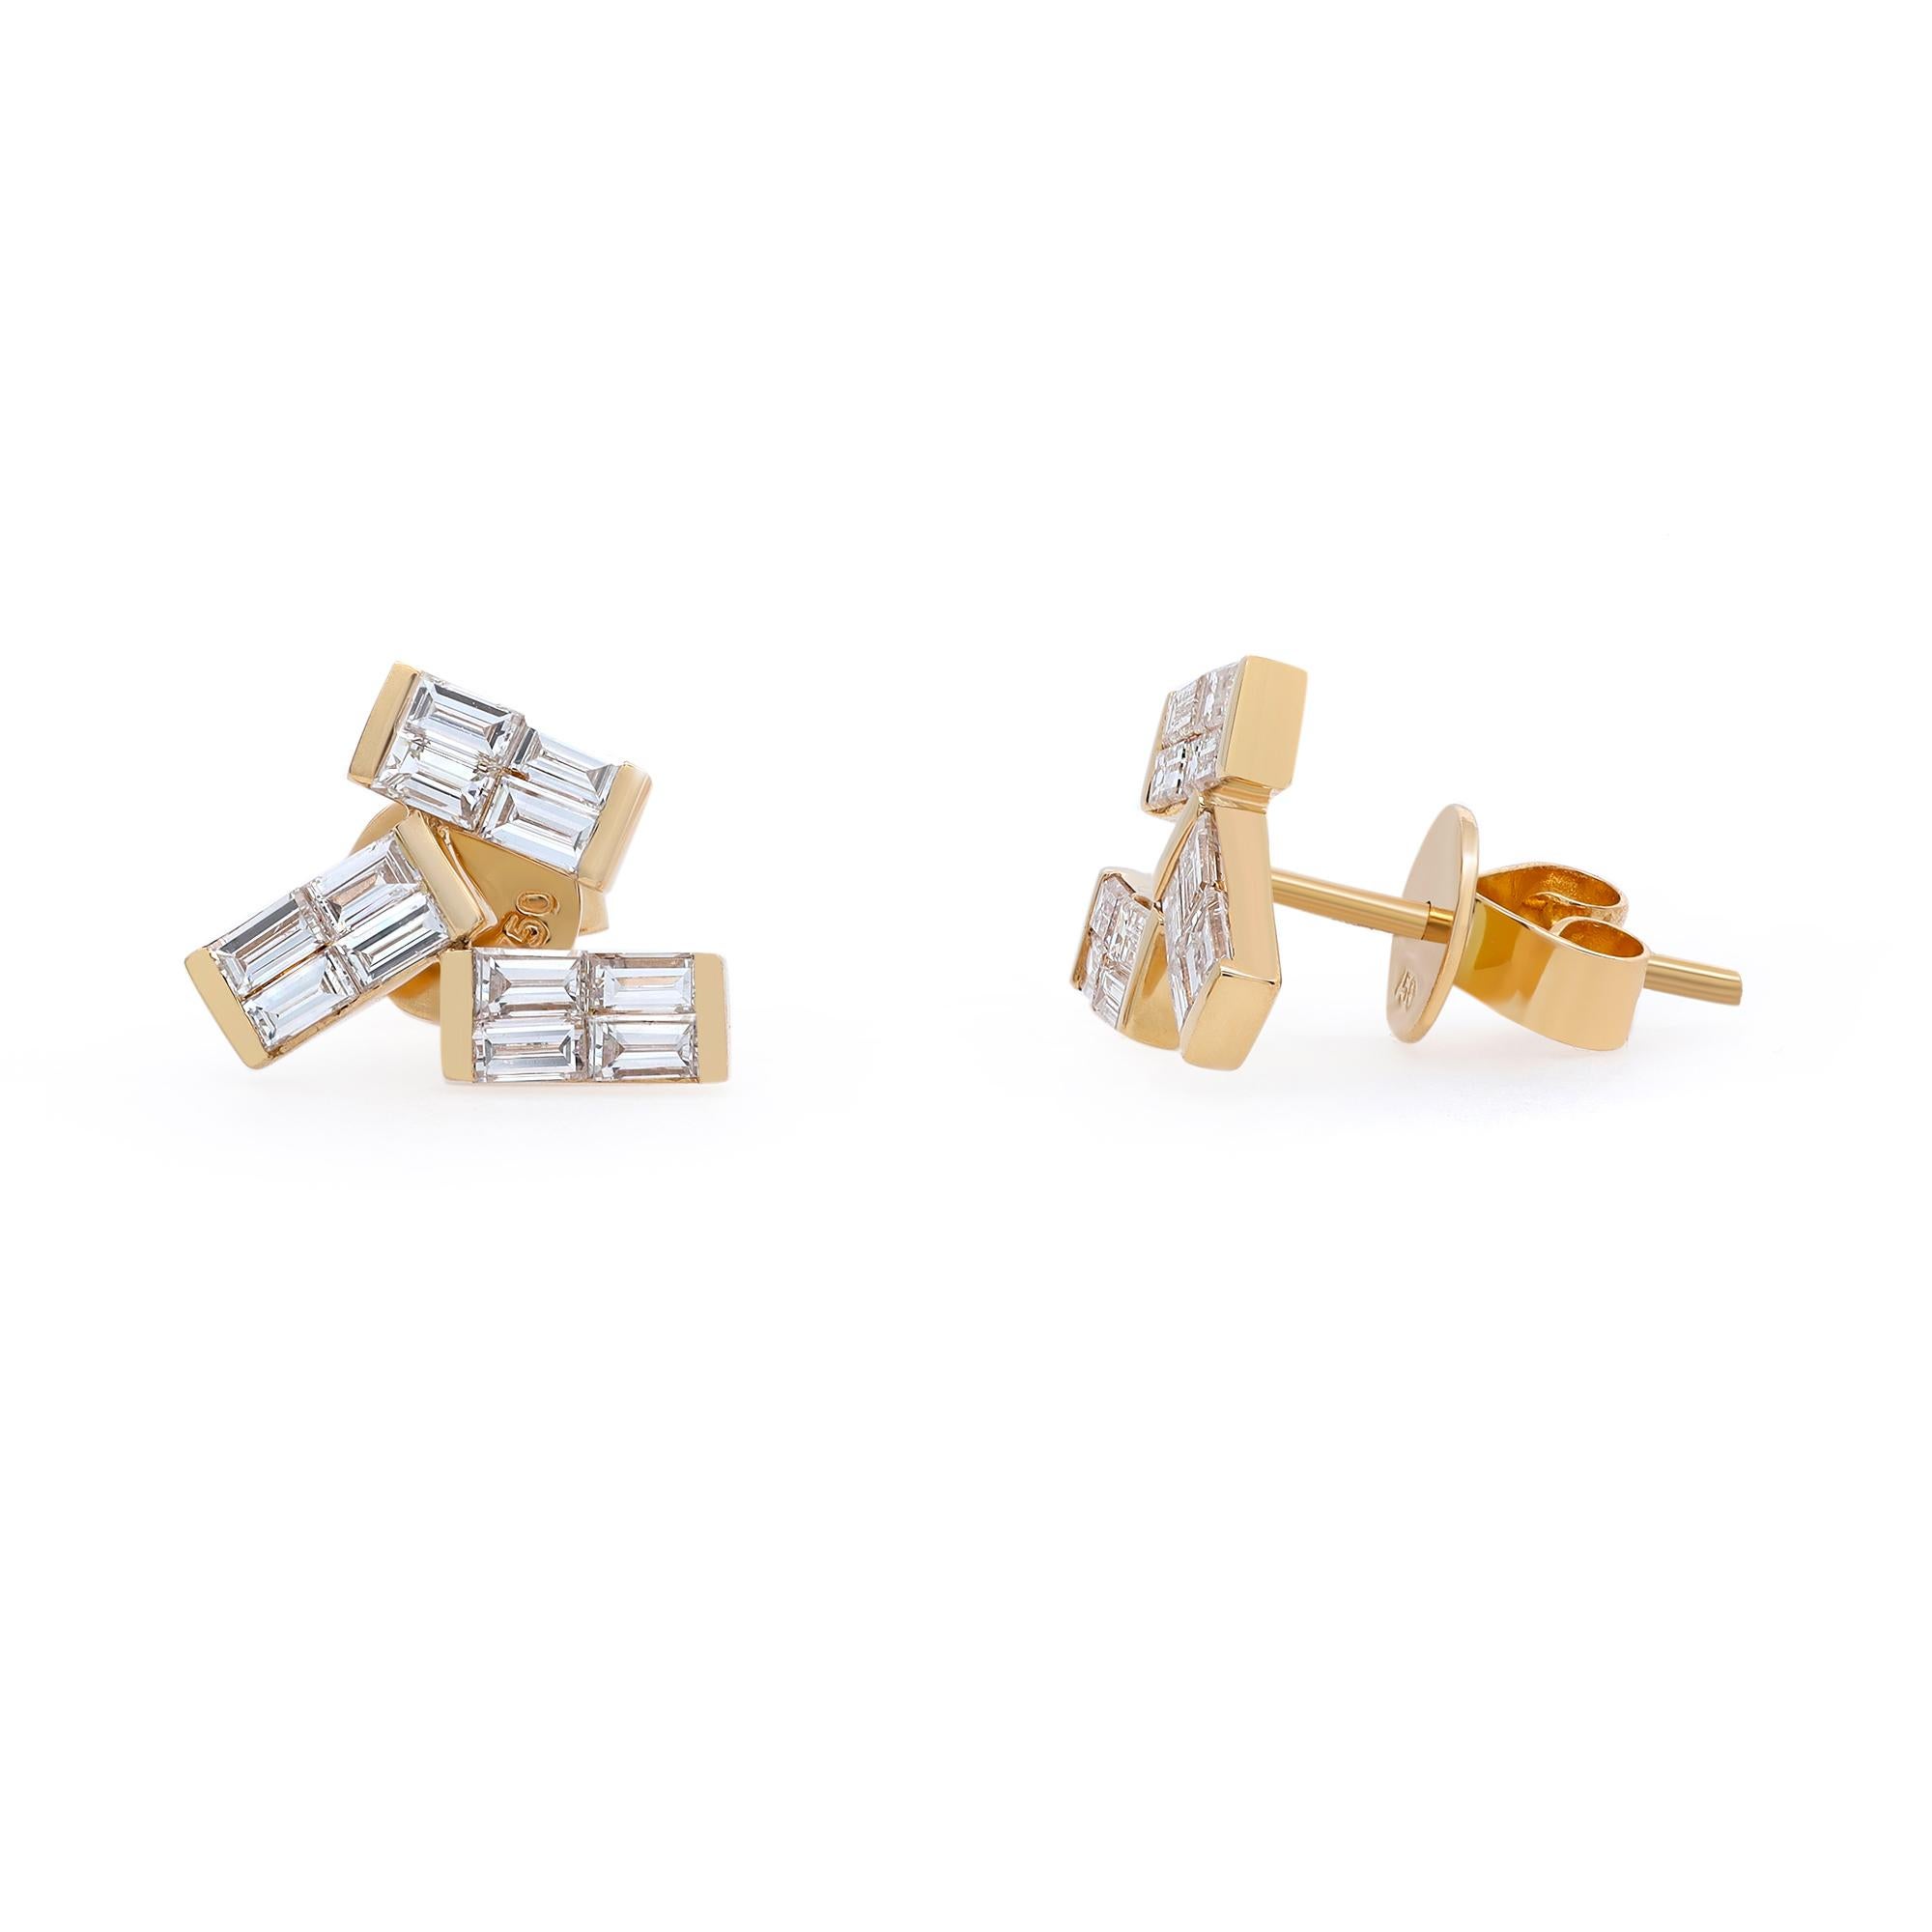 Delicate and feminine, these beautiful diamond stud earrings are lightweight and make a highly impactful statement. Features channel set baguette cut diamonds weighing 0.83 carat. Diamond Quality: G-H color and VS-SI. Secured with easy pushbacks.